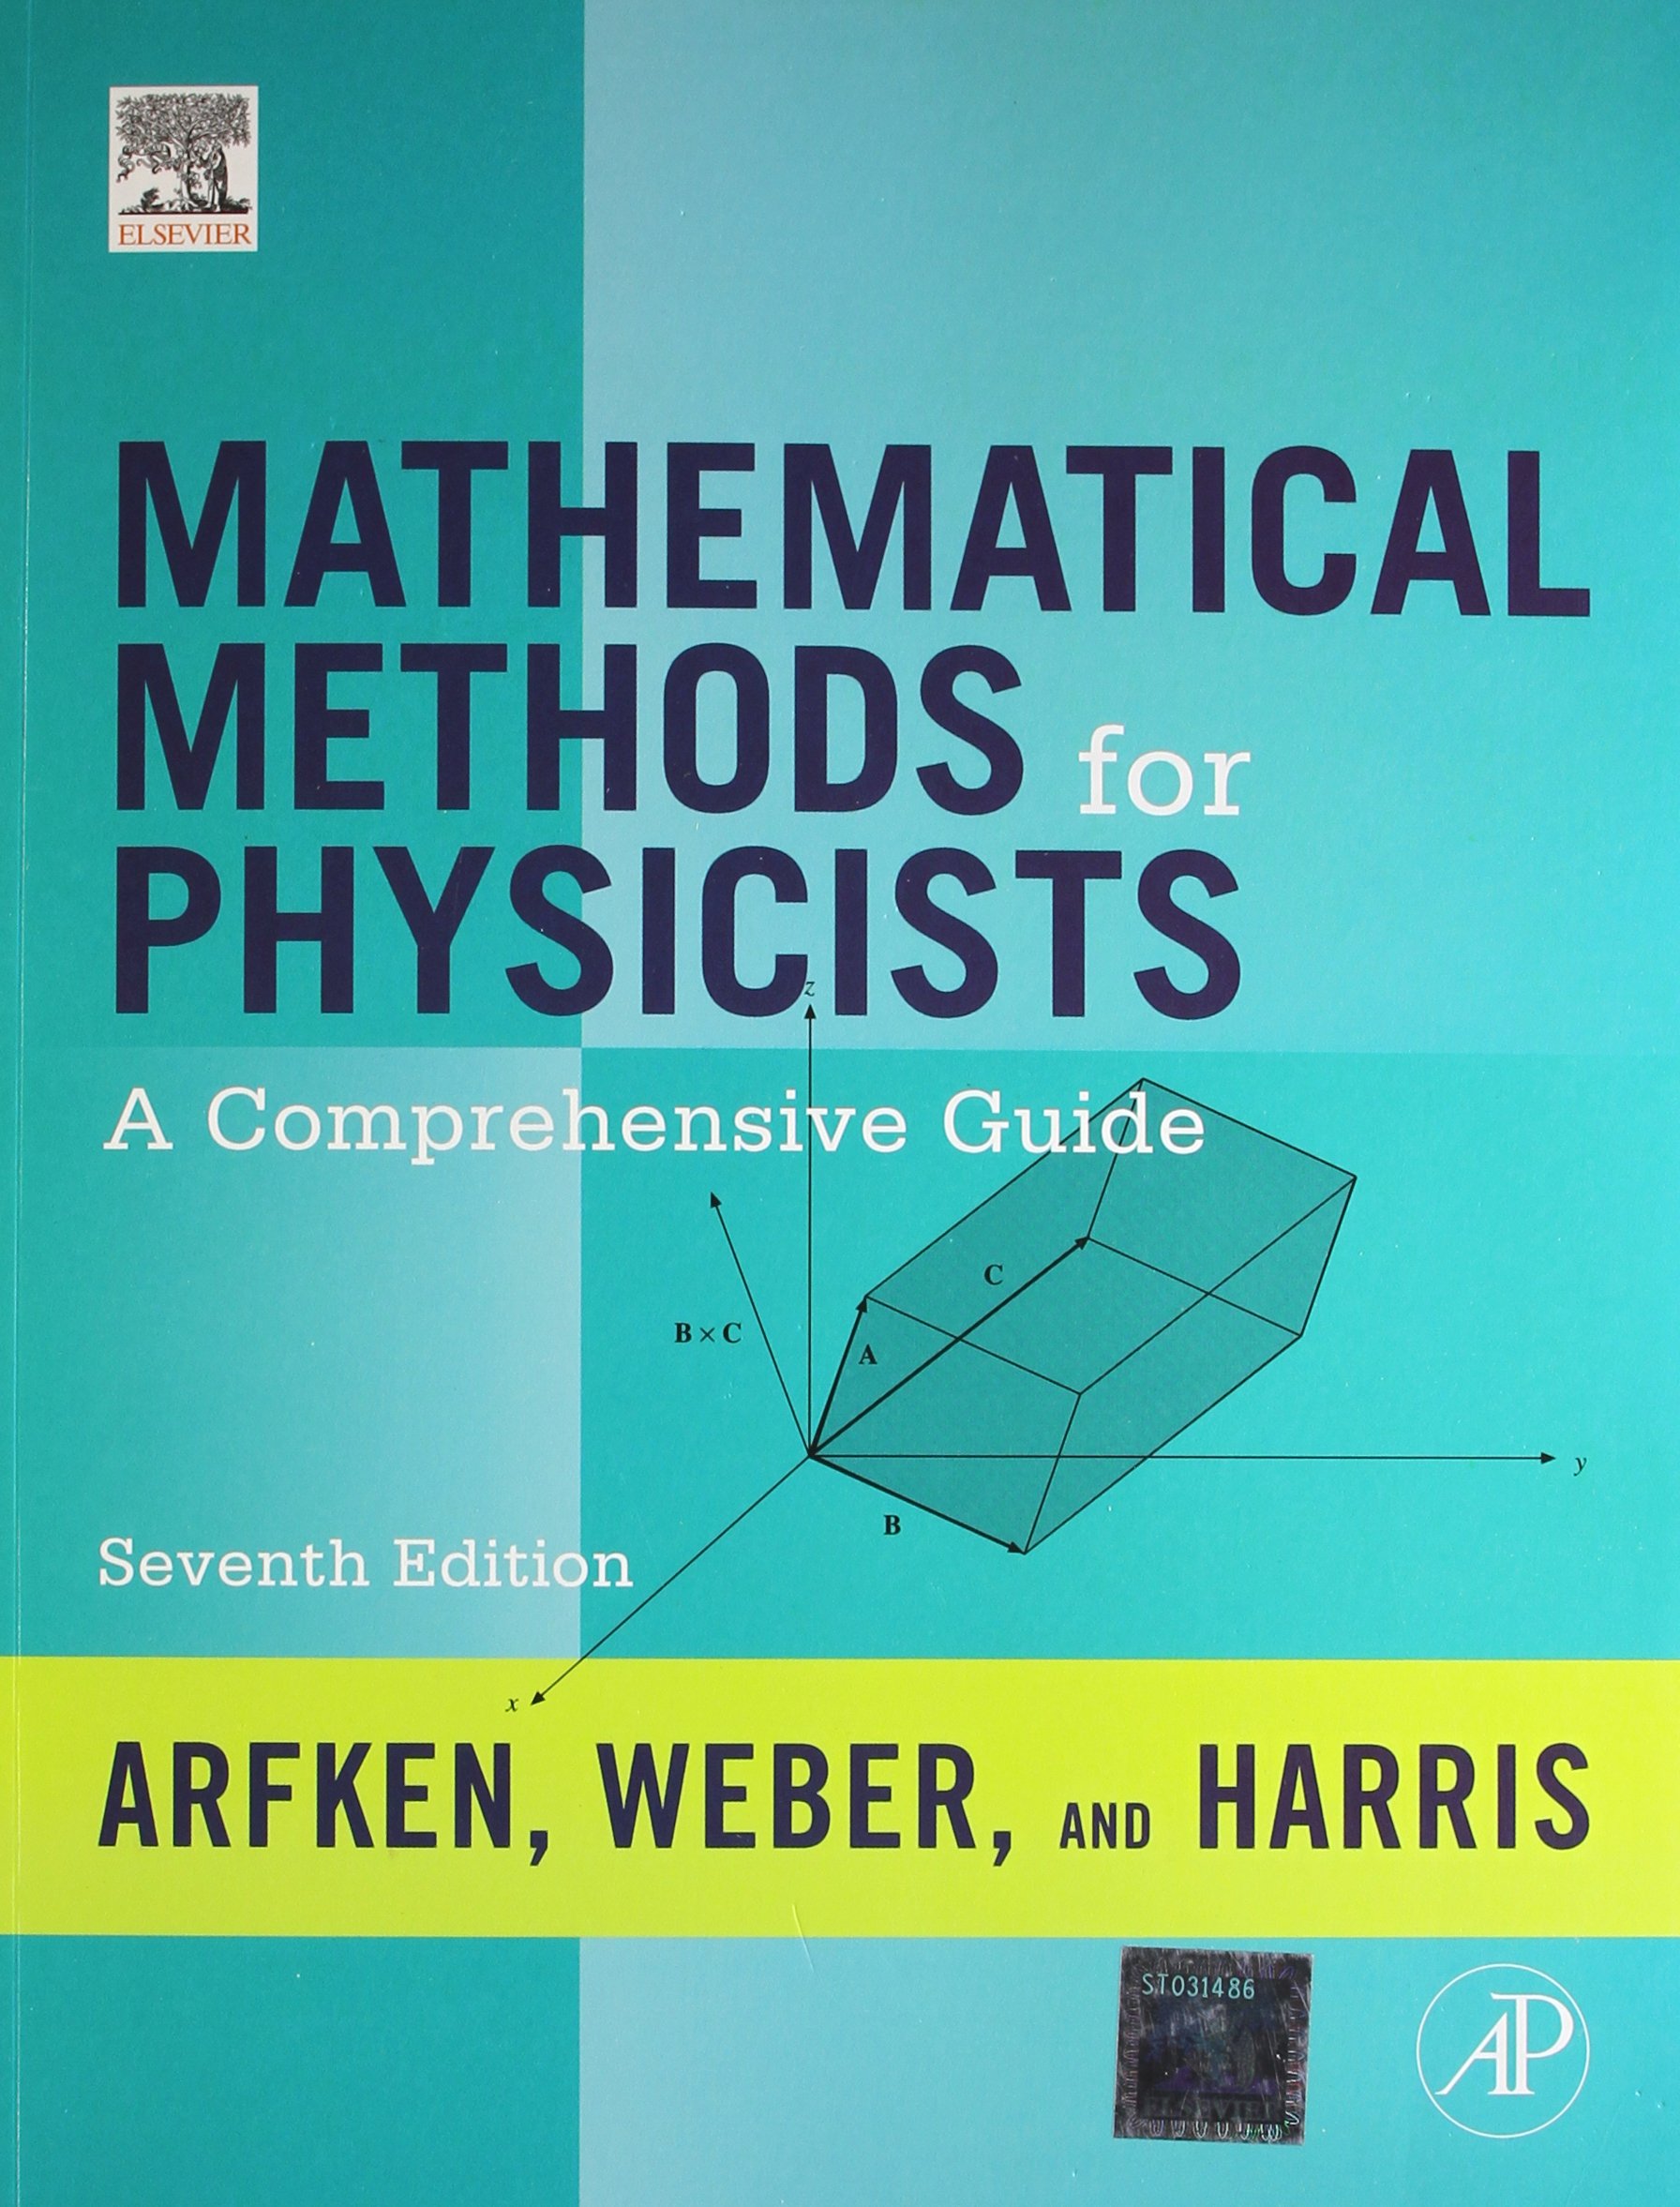 Mathematica Methods for Physicists